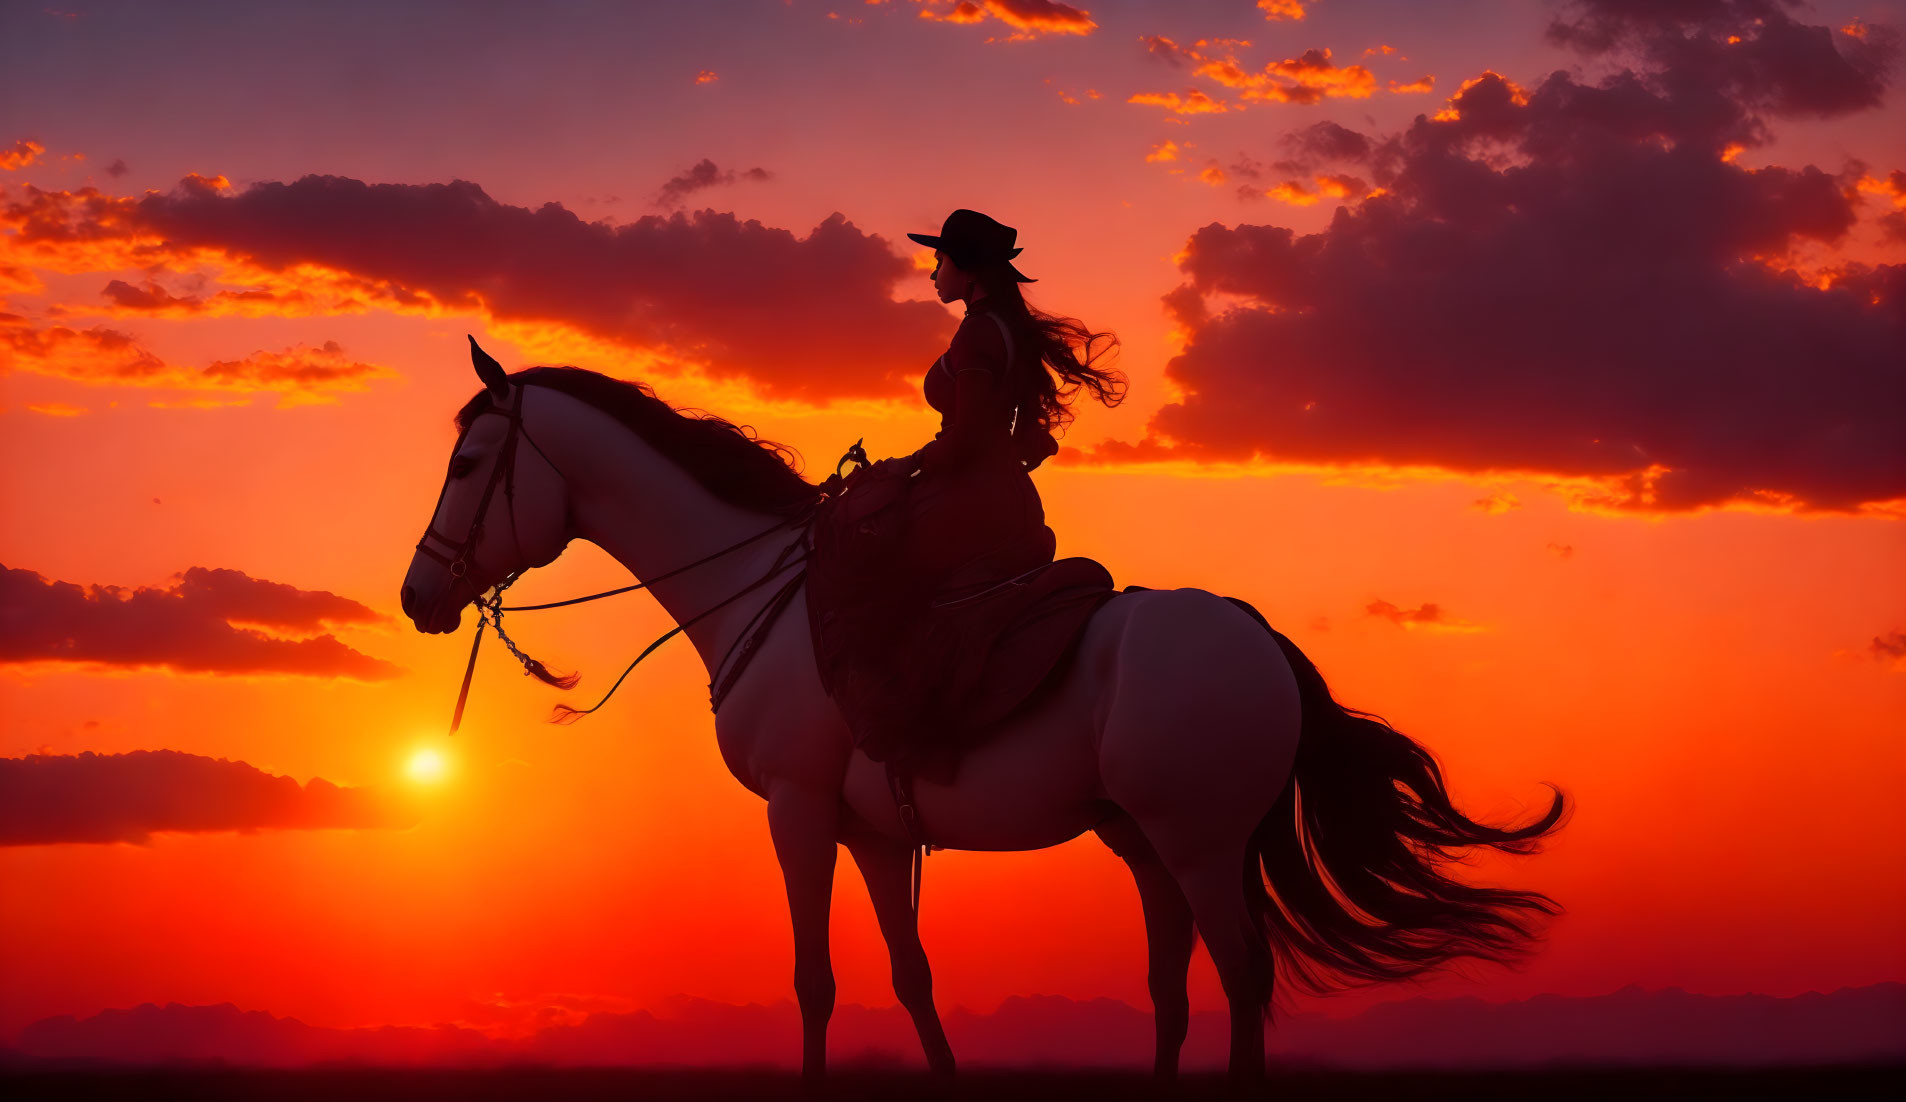 Riding a horse at sunset